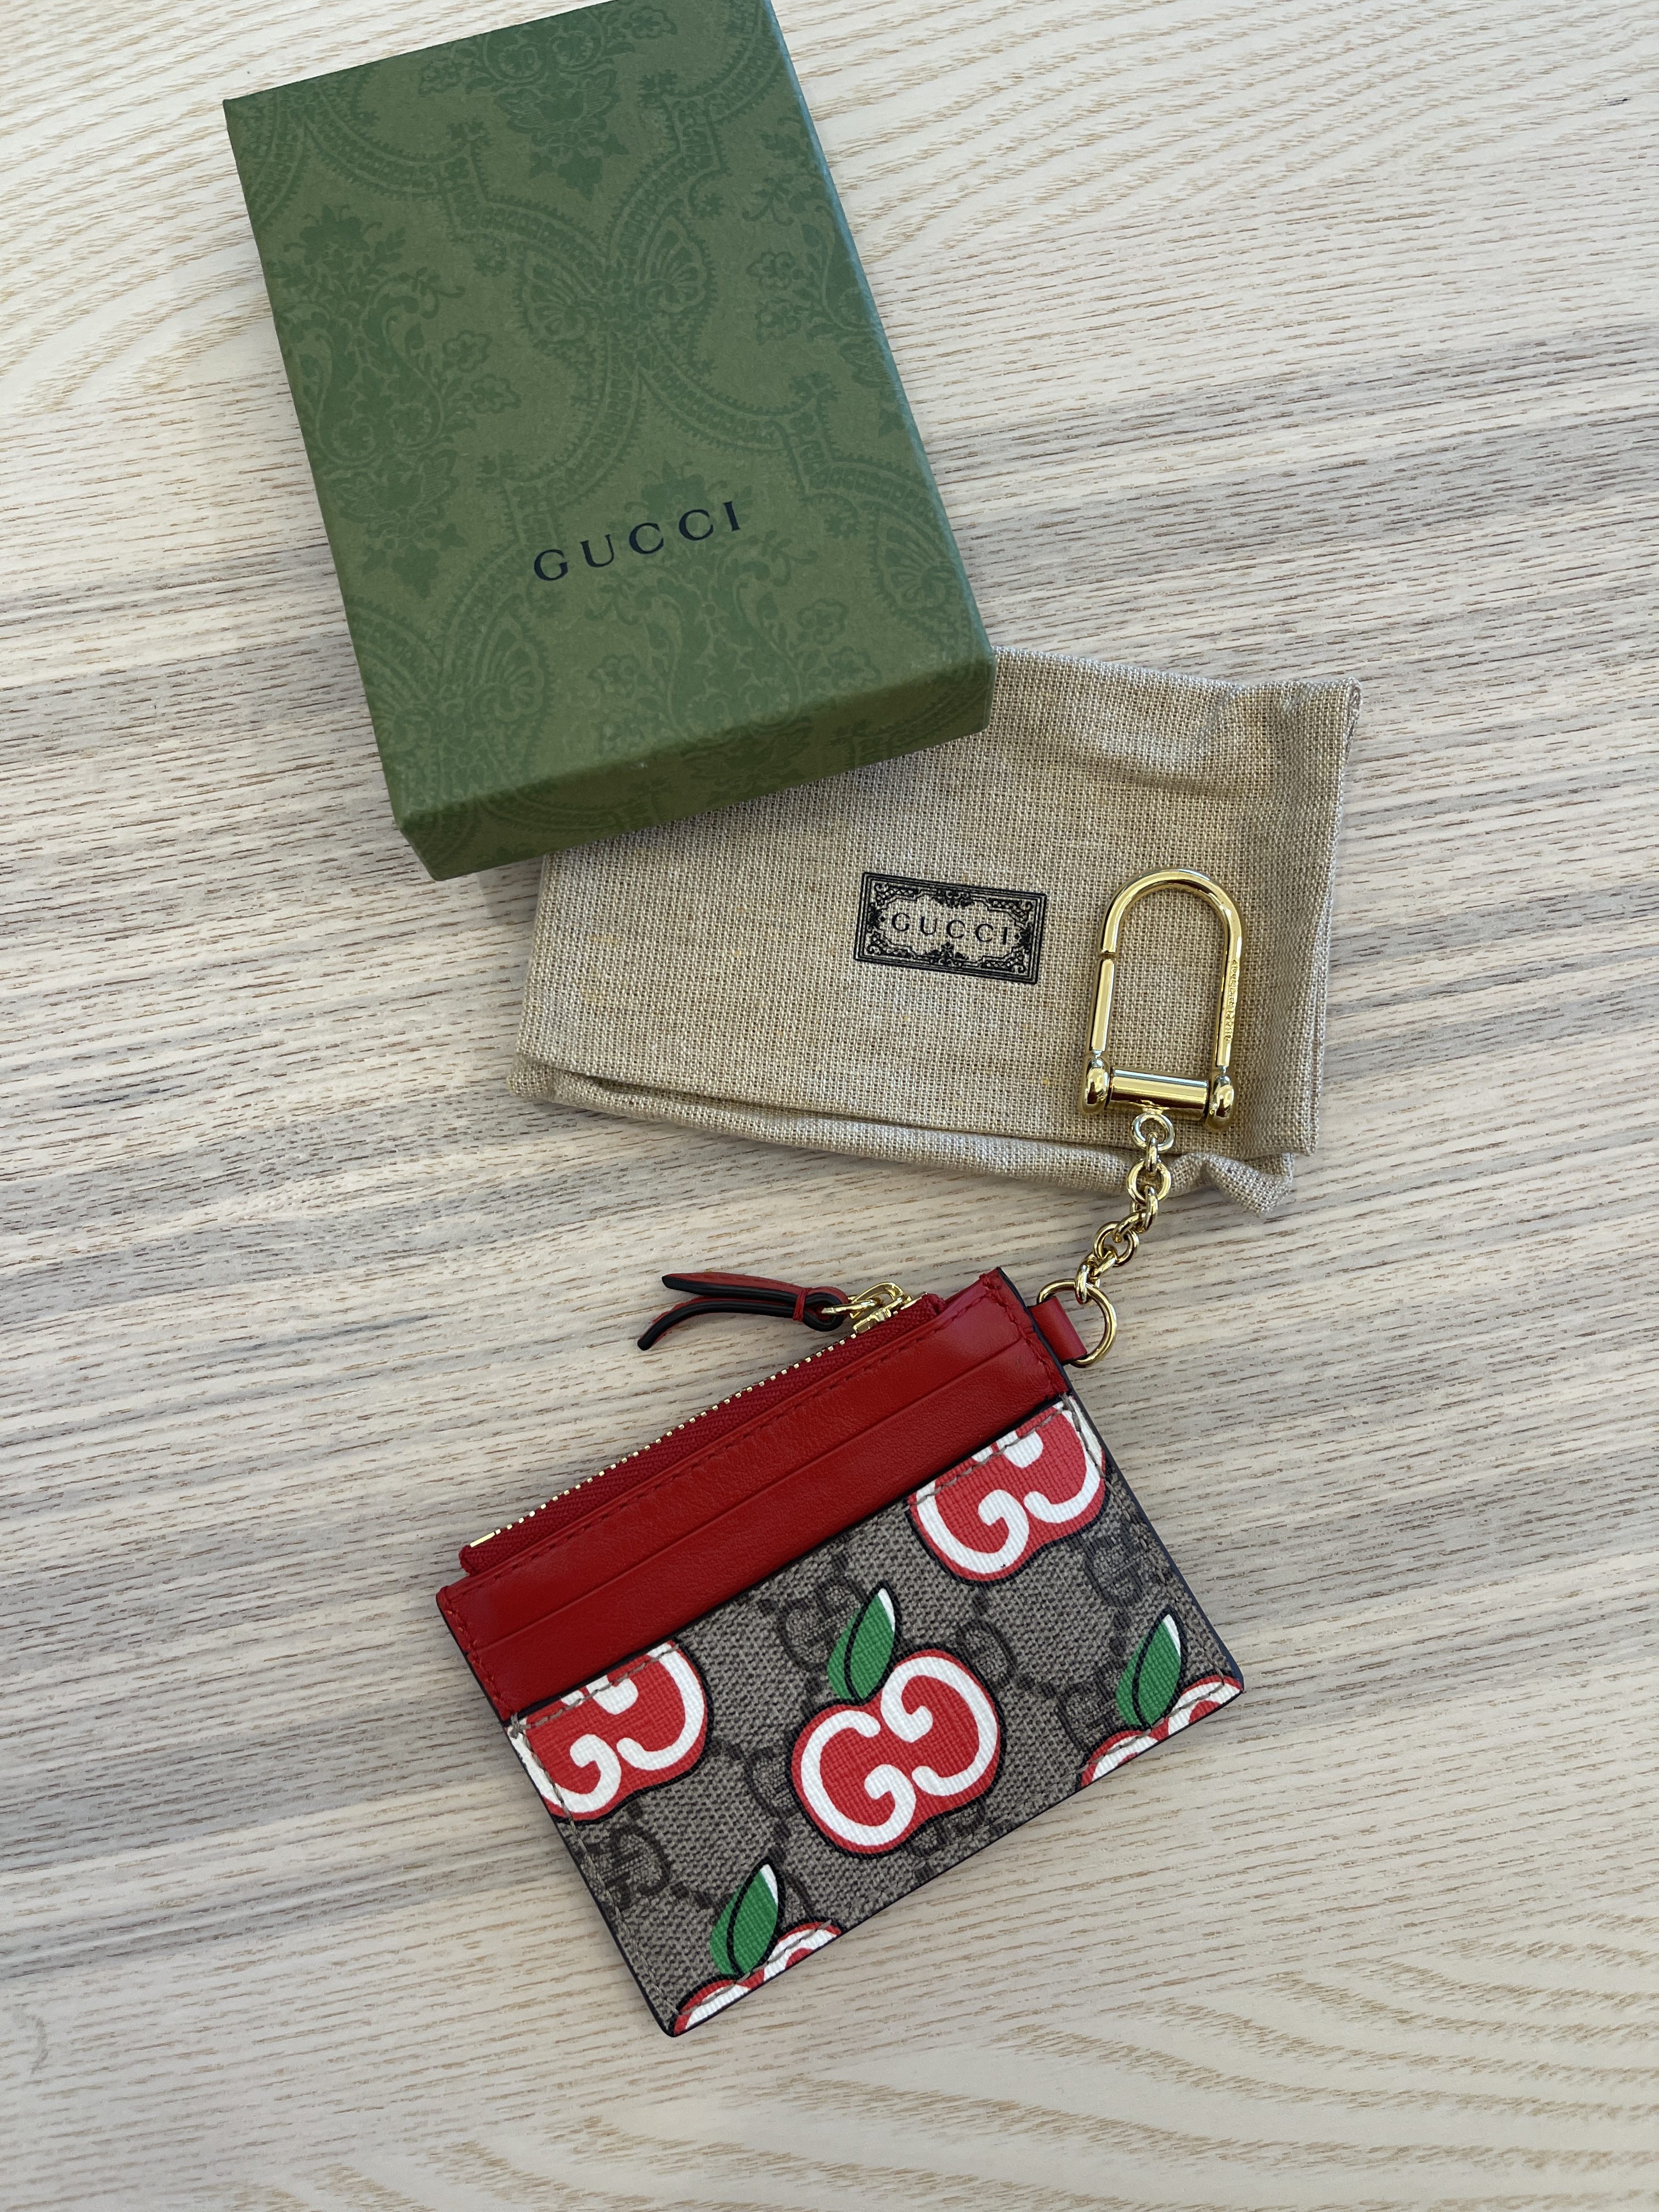 NEW GUCCI Monogram Apple Print Card Holder Wallet GG Red